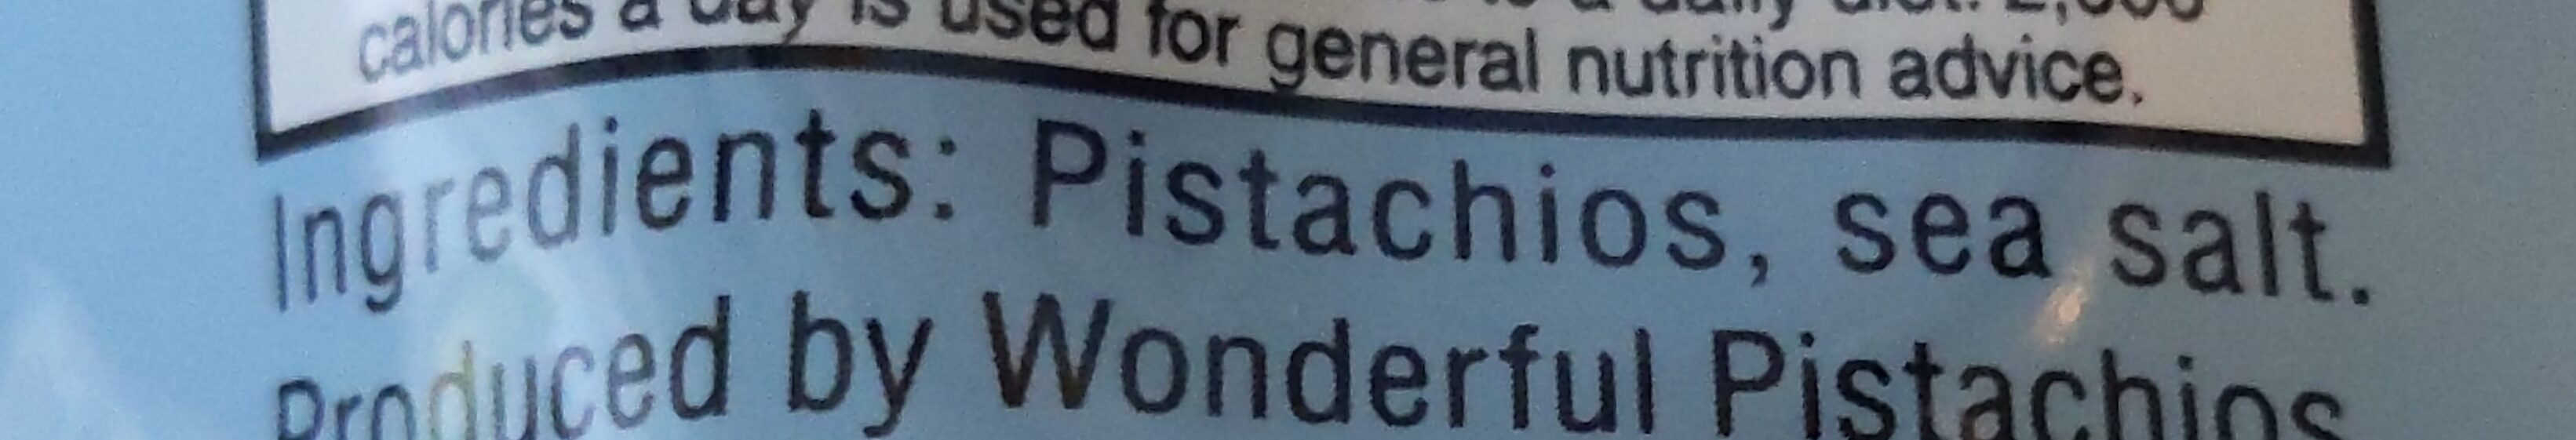 Lightly Salted Pistachios - Ingredients